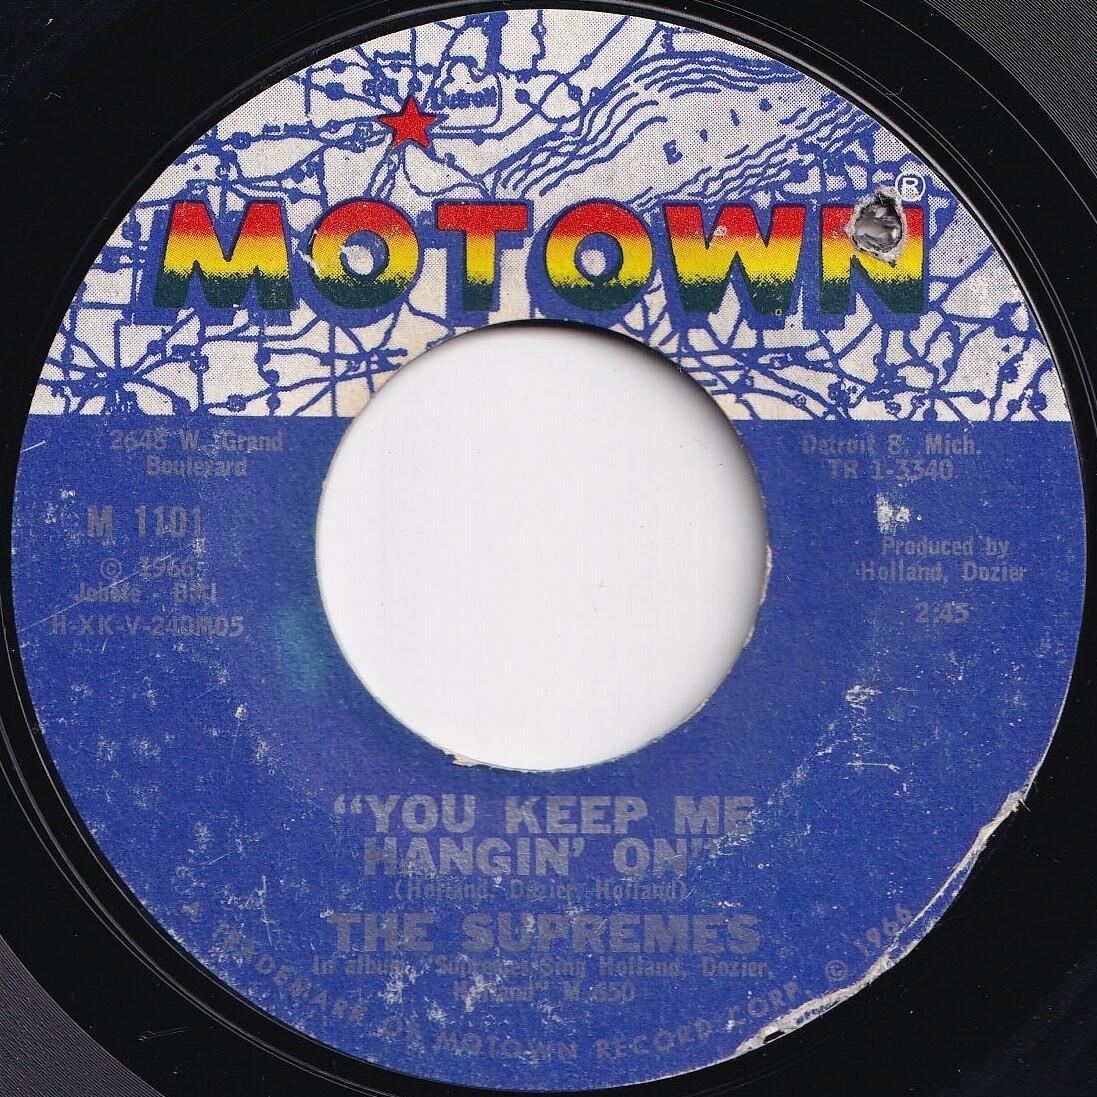 Supremes You Keep Me Hangin' On / Remove This Doubt Motown US M 1101 205993 SOUL ソウル レコード 7インチ 45_画像1